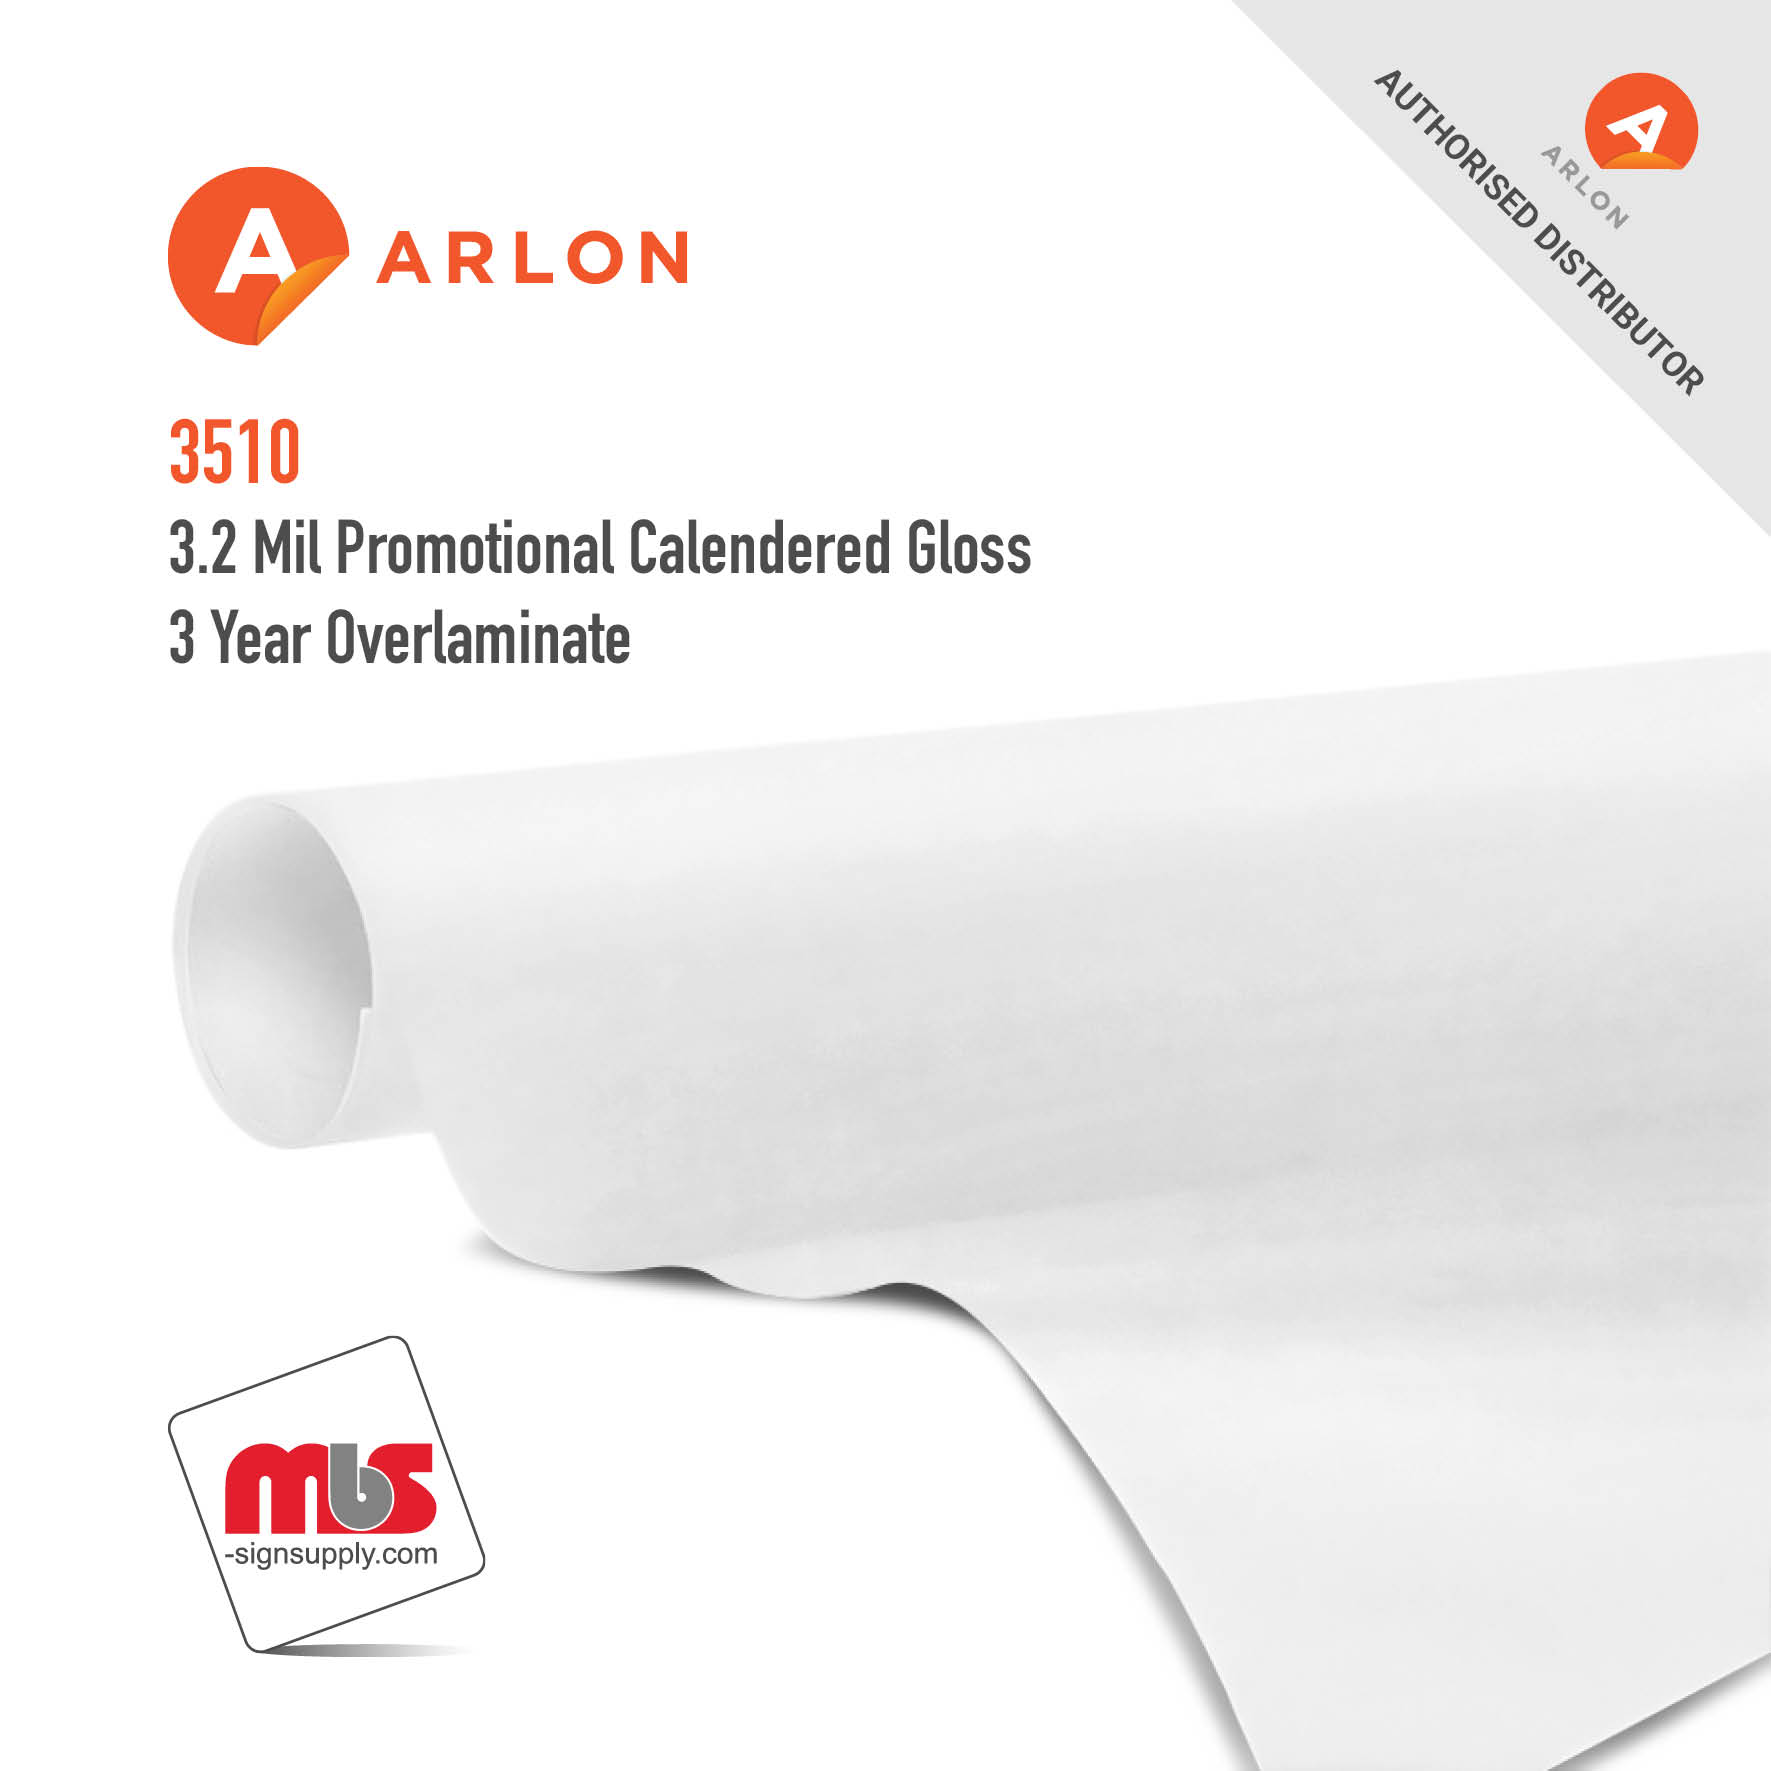 60'' x 50 Yard Roll - Arlon 3510 3.2 Mil Promotional Calendered Matte 3 Year Overlaminate